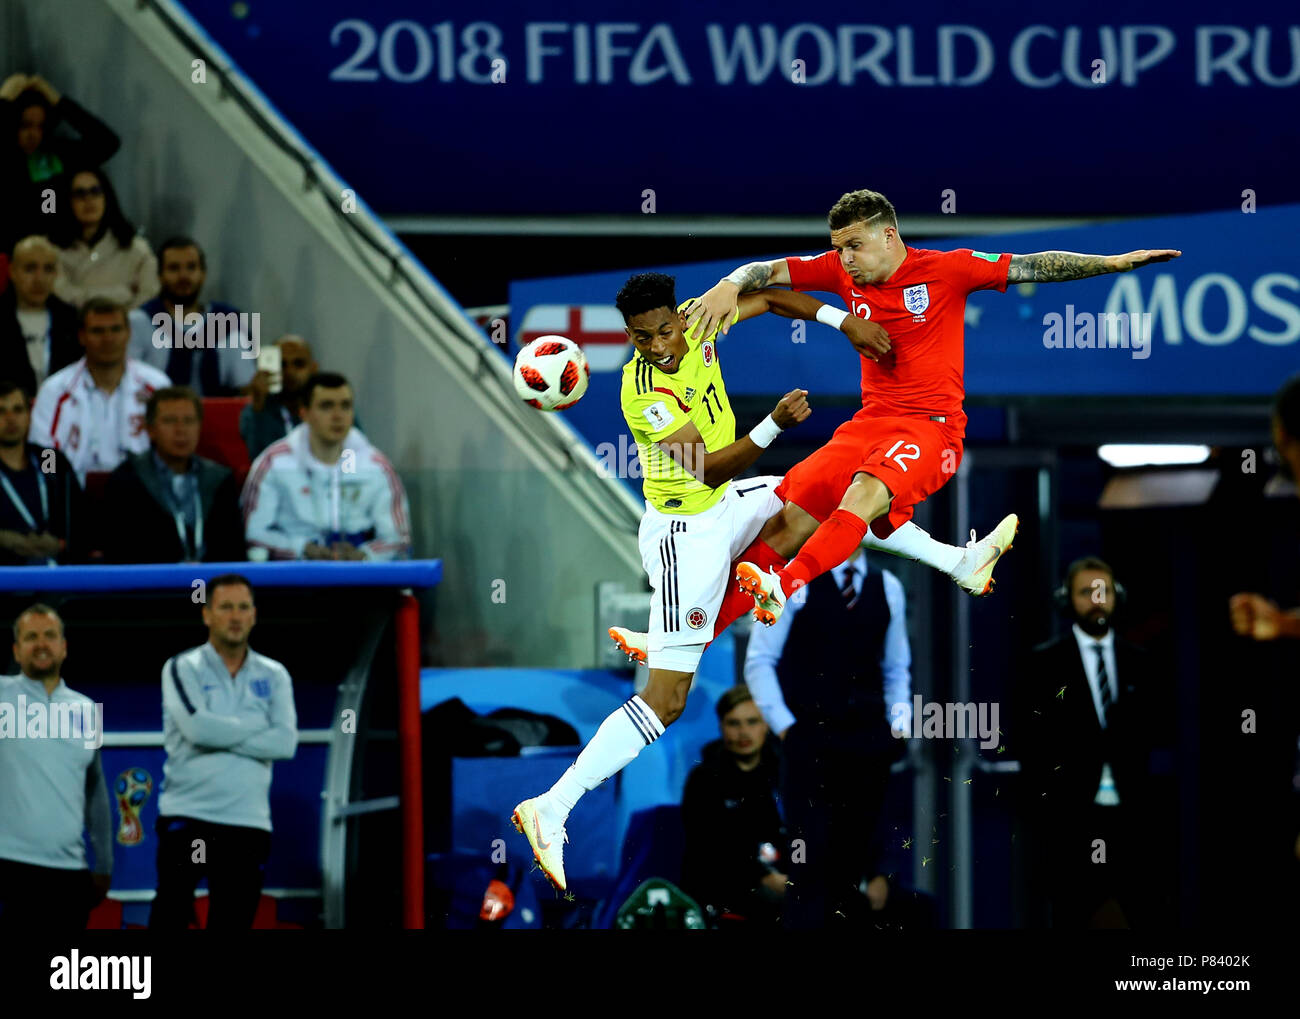 MOSCOW, RUSSIA - JULY 03:Johan MOJICA of Colombia ,challenge with Kieran TRIPPIER of England during the 2018 FIFA World Cup Russia Round of 16 match between Colombia and England at Spartak Stadium  on July 3, 2018 in Moscow, Russia. (MB Media) Stock Photo